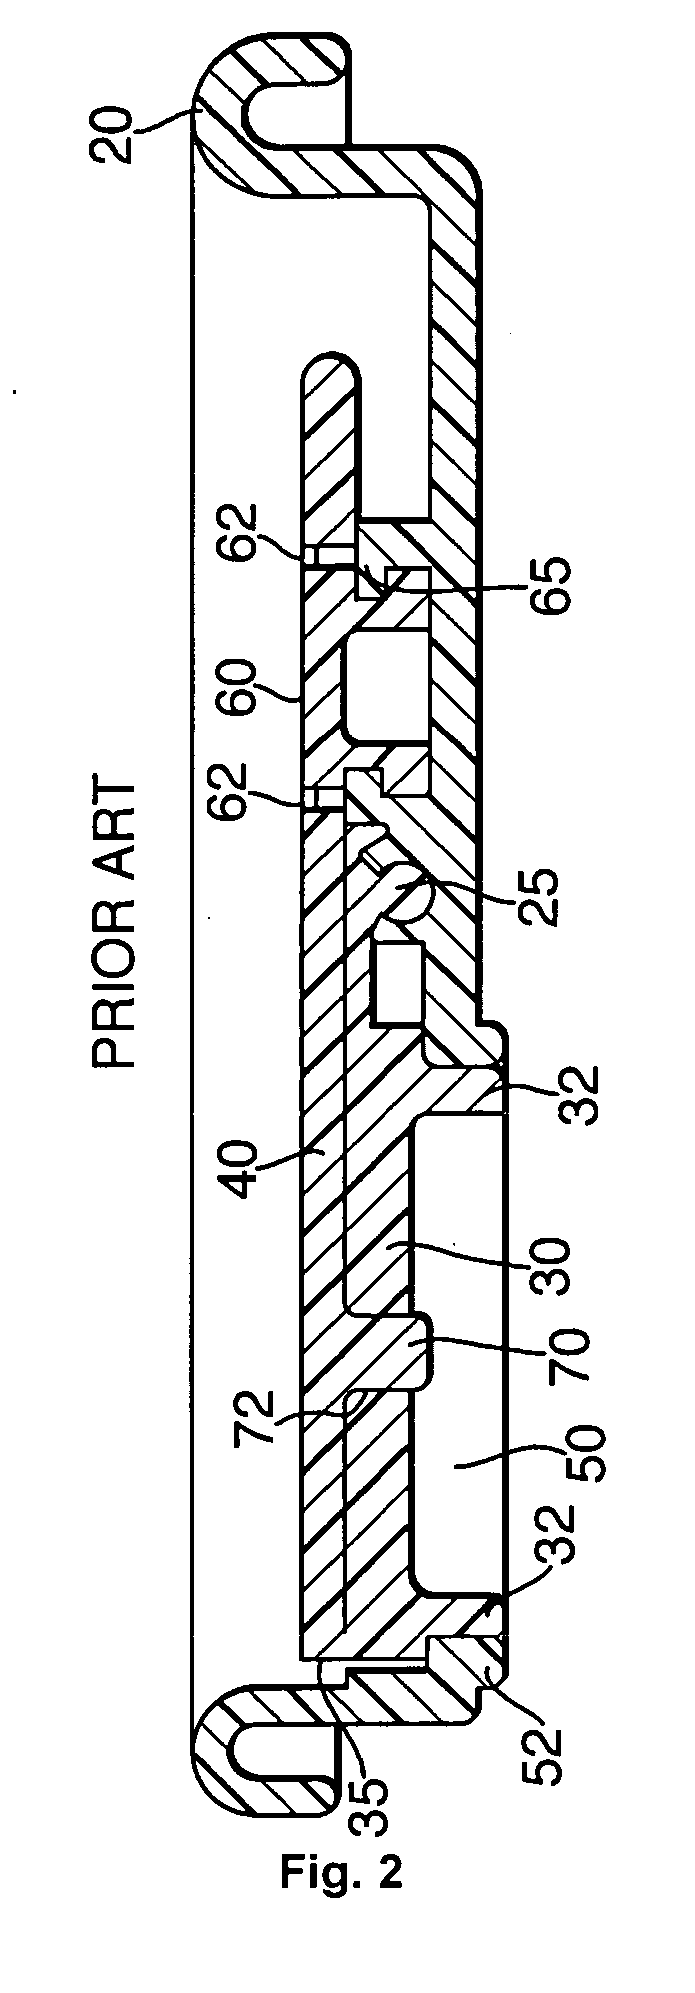 Sealing device for a container